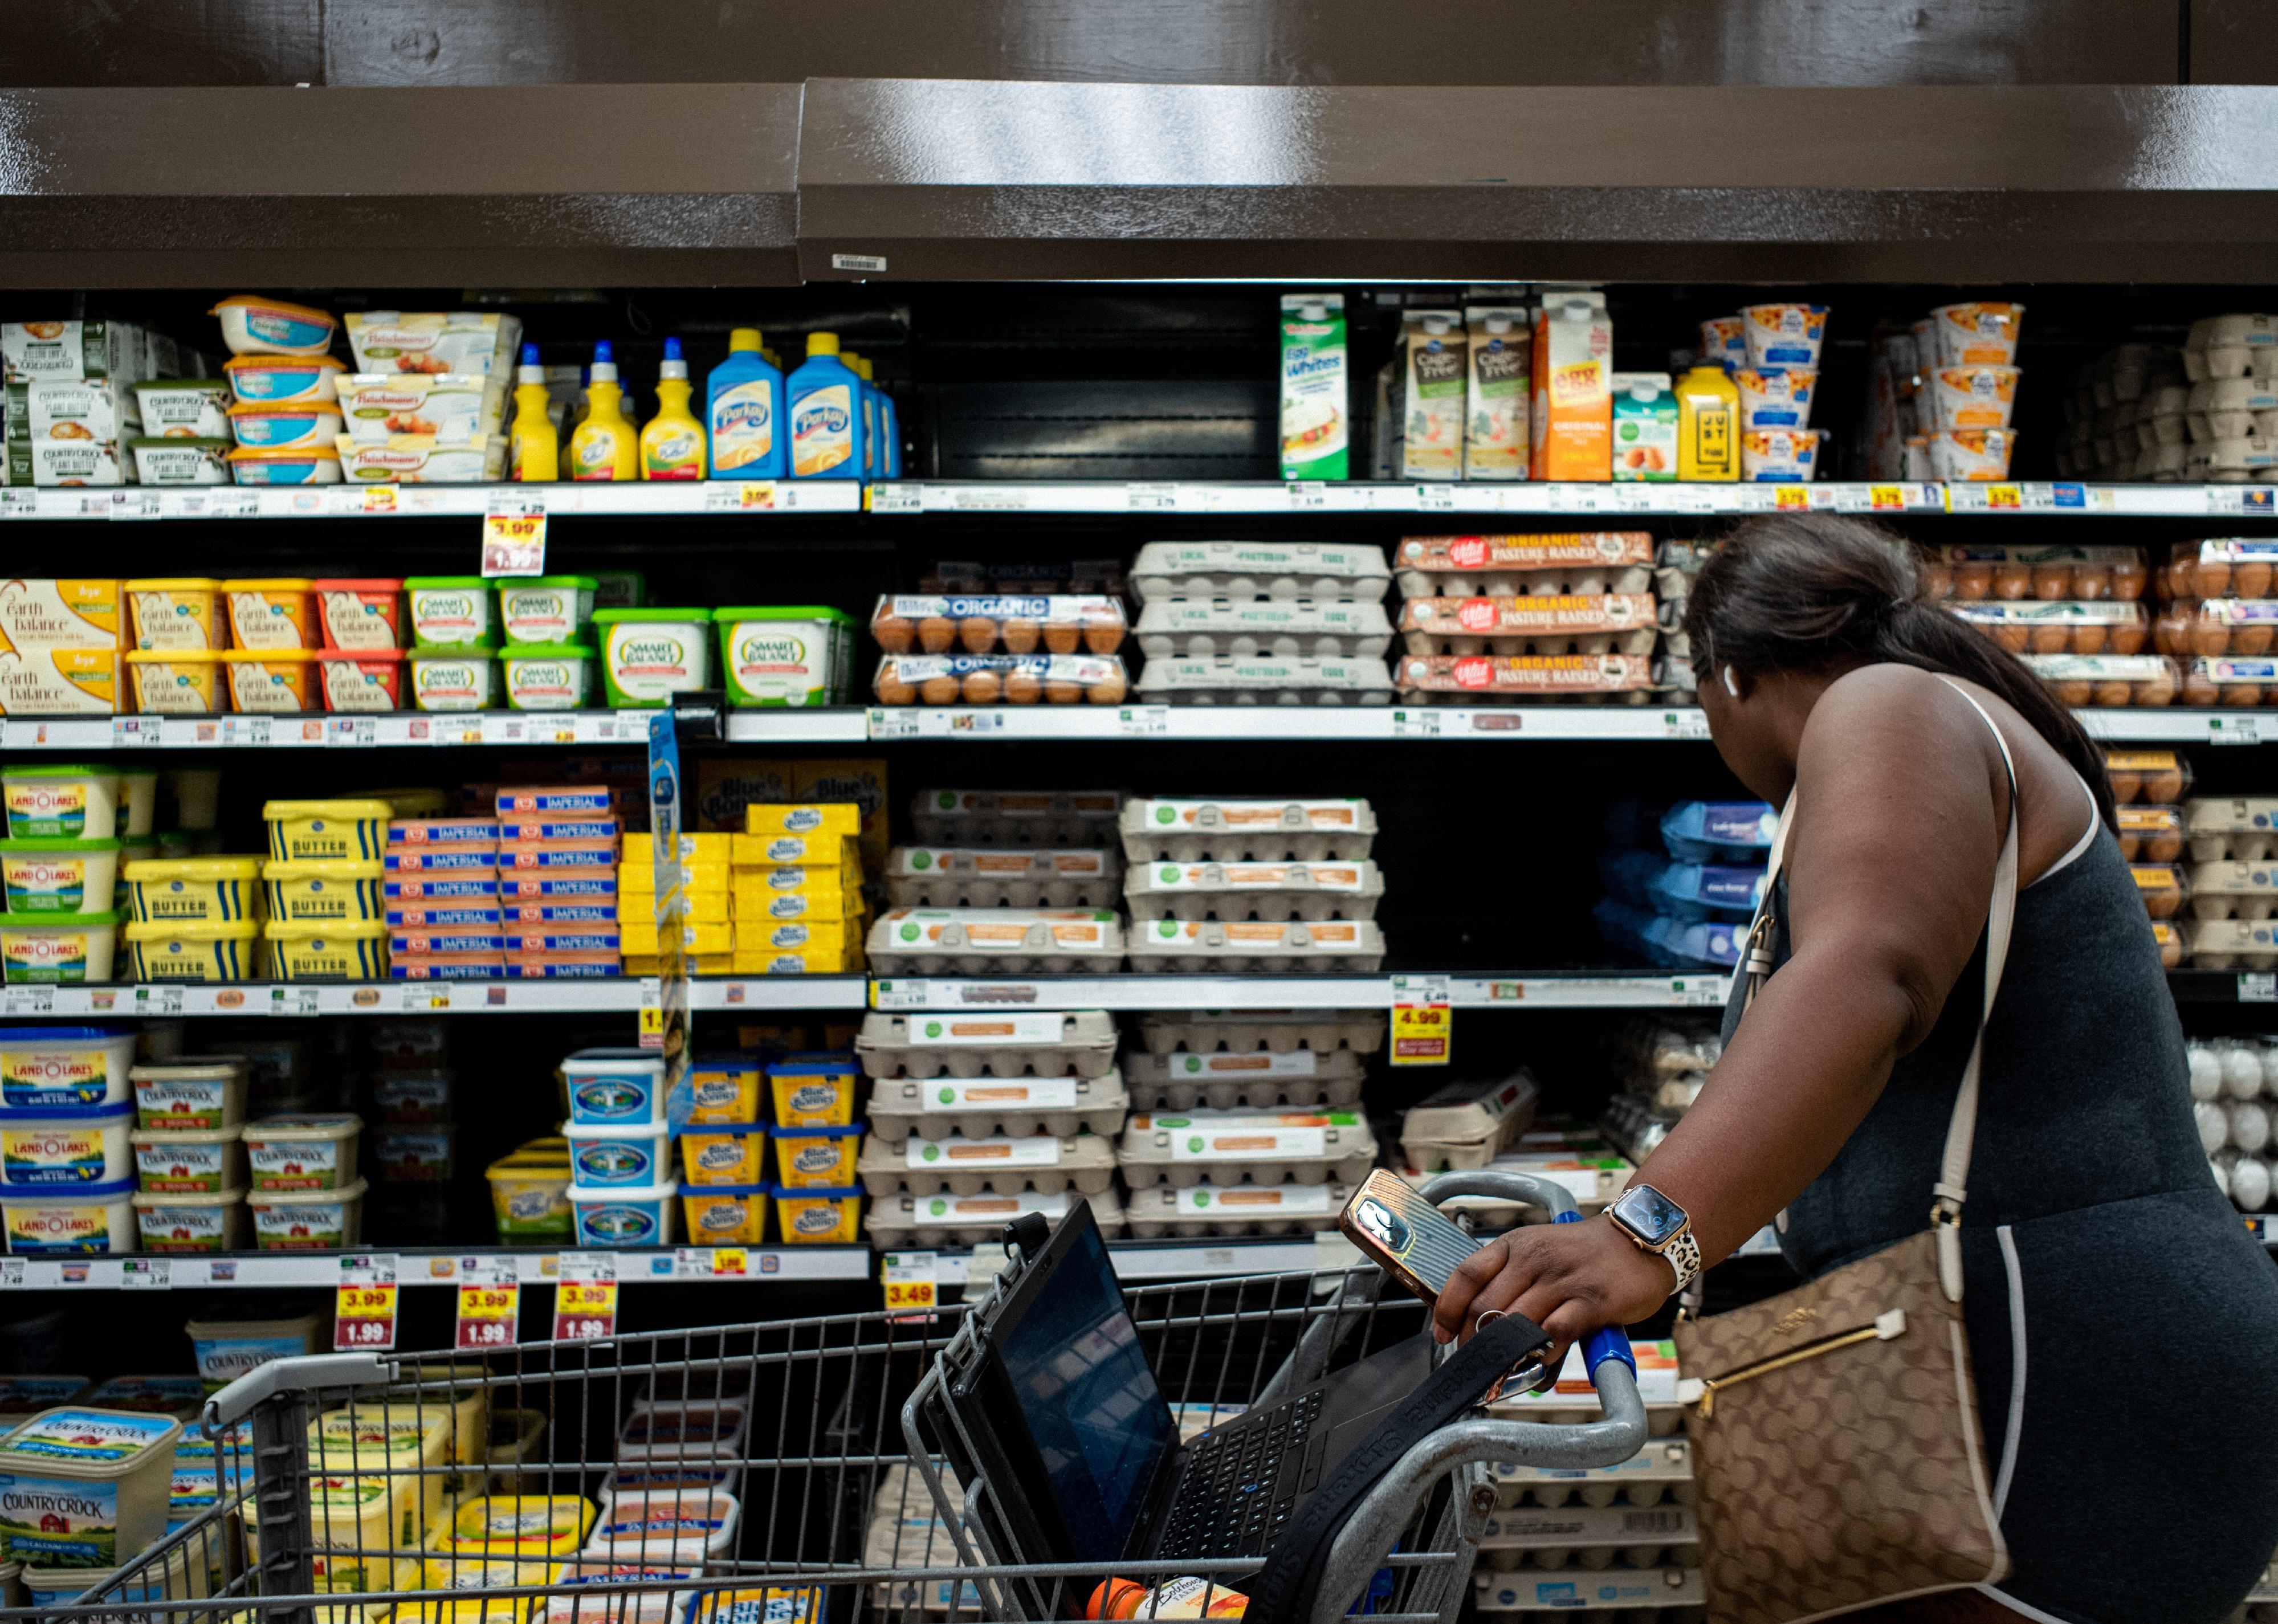 A woman shops for eggs in the grocery store with a cart.